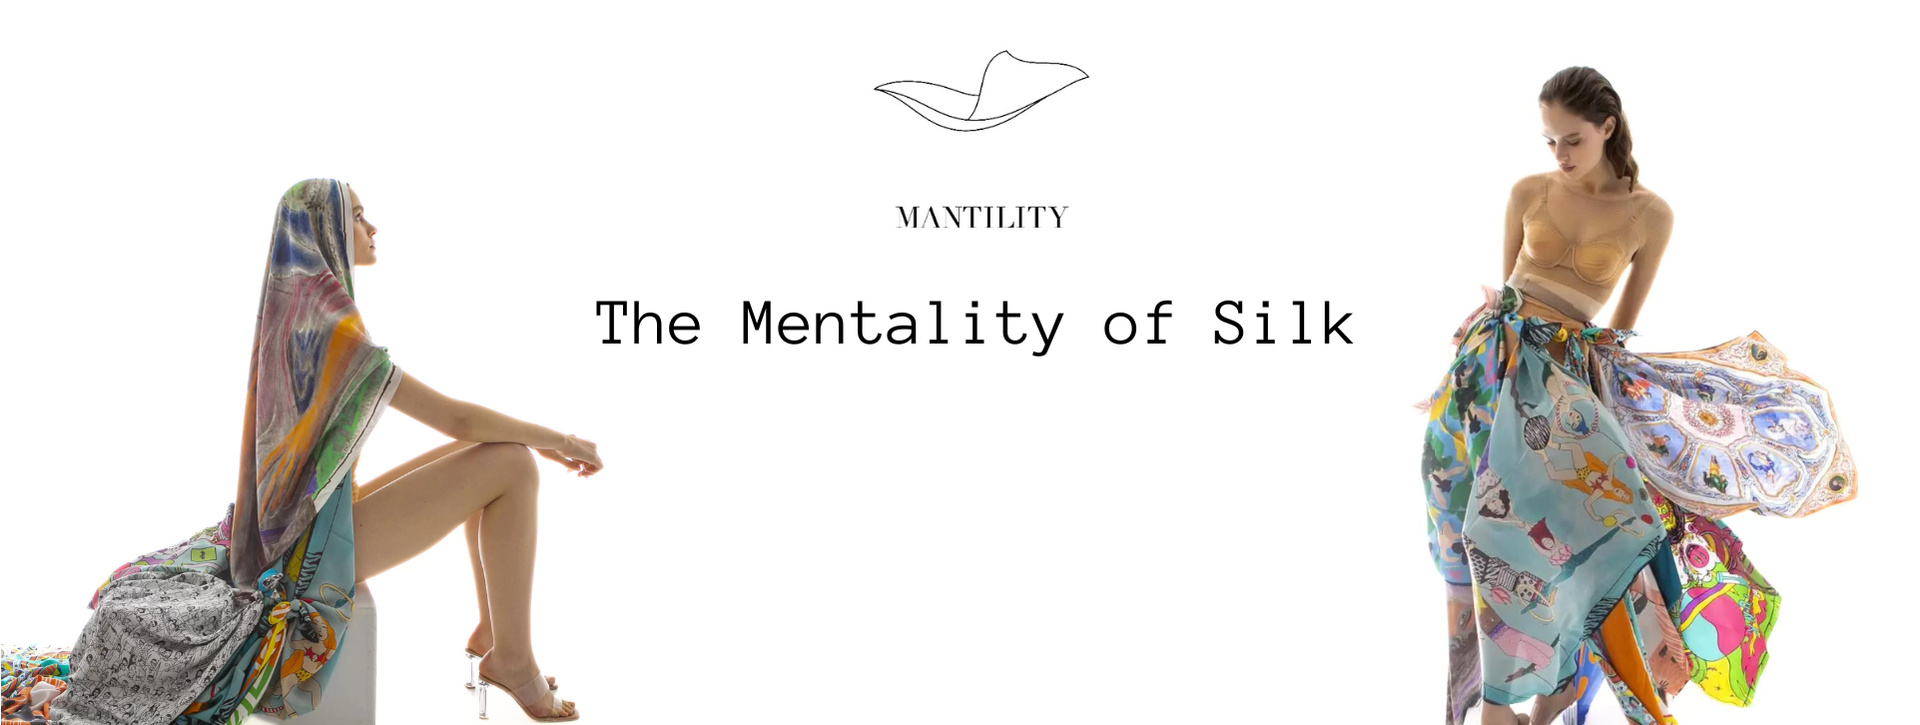 Mantility - The Mentality of Silk